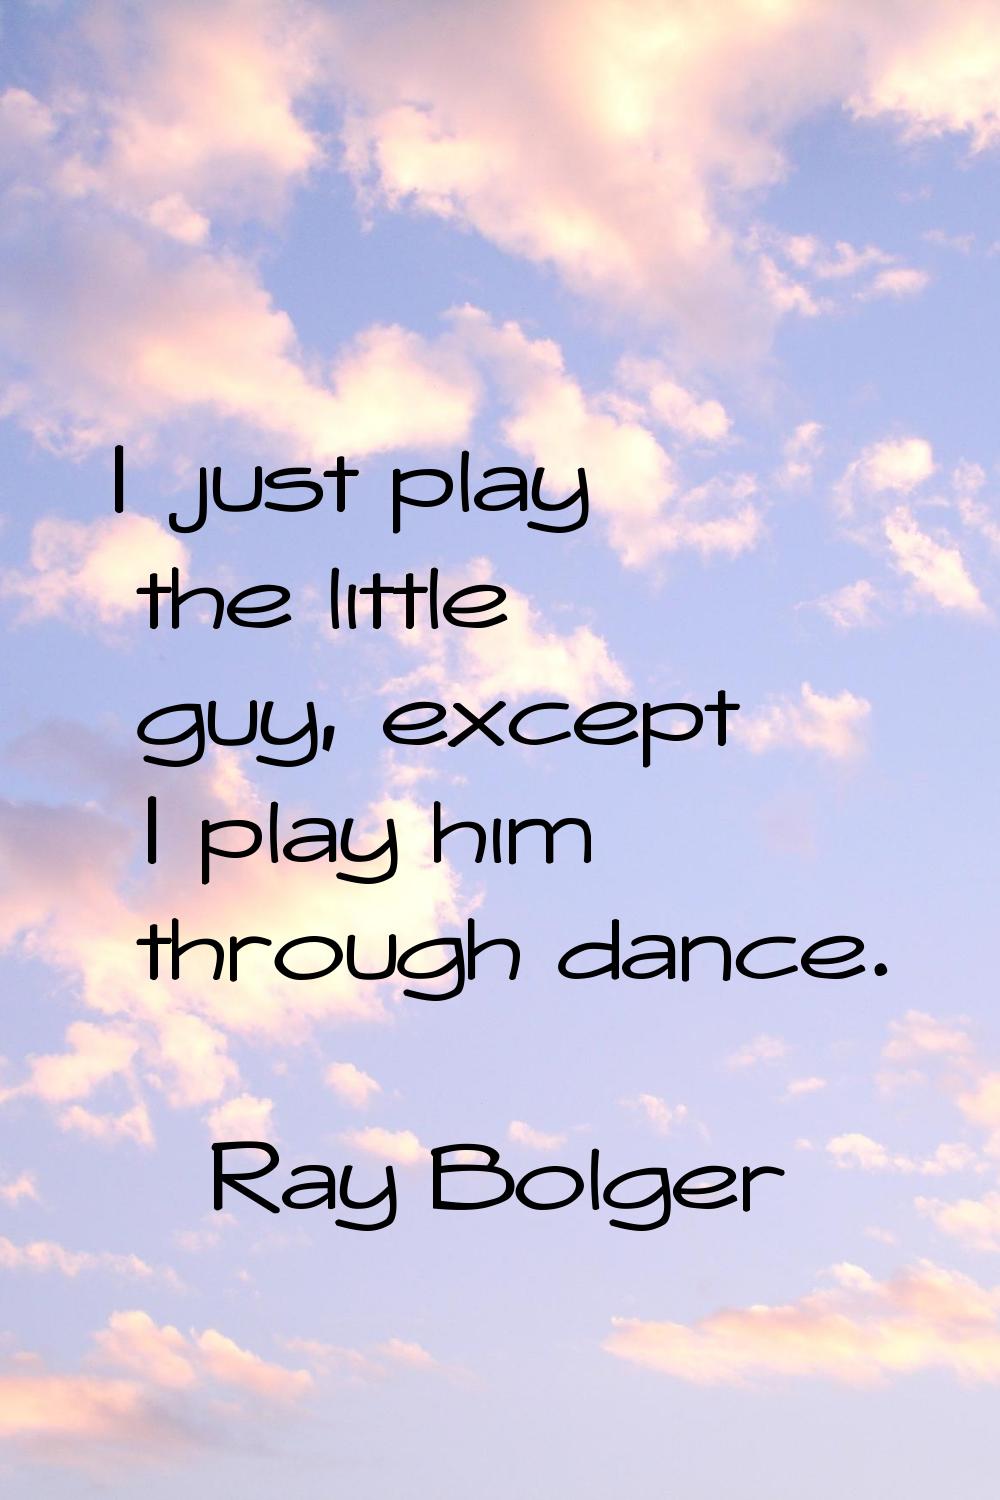 I just play the little guy, except I play him through dance.